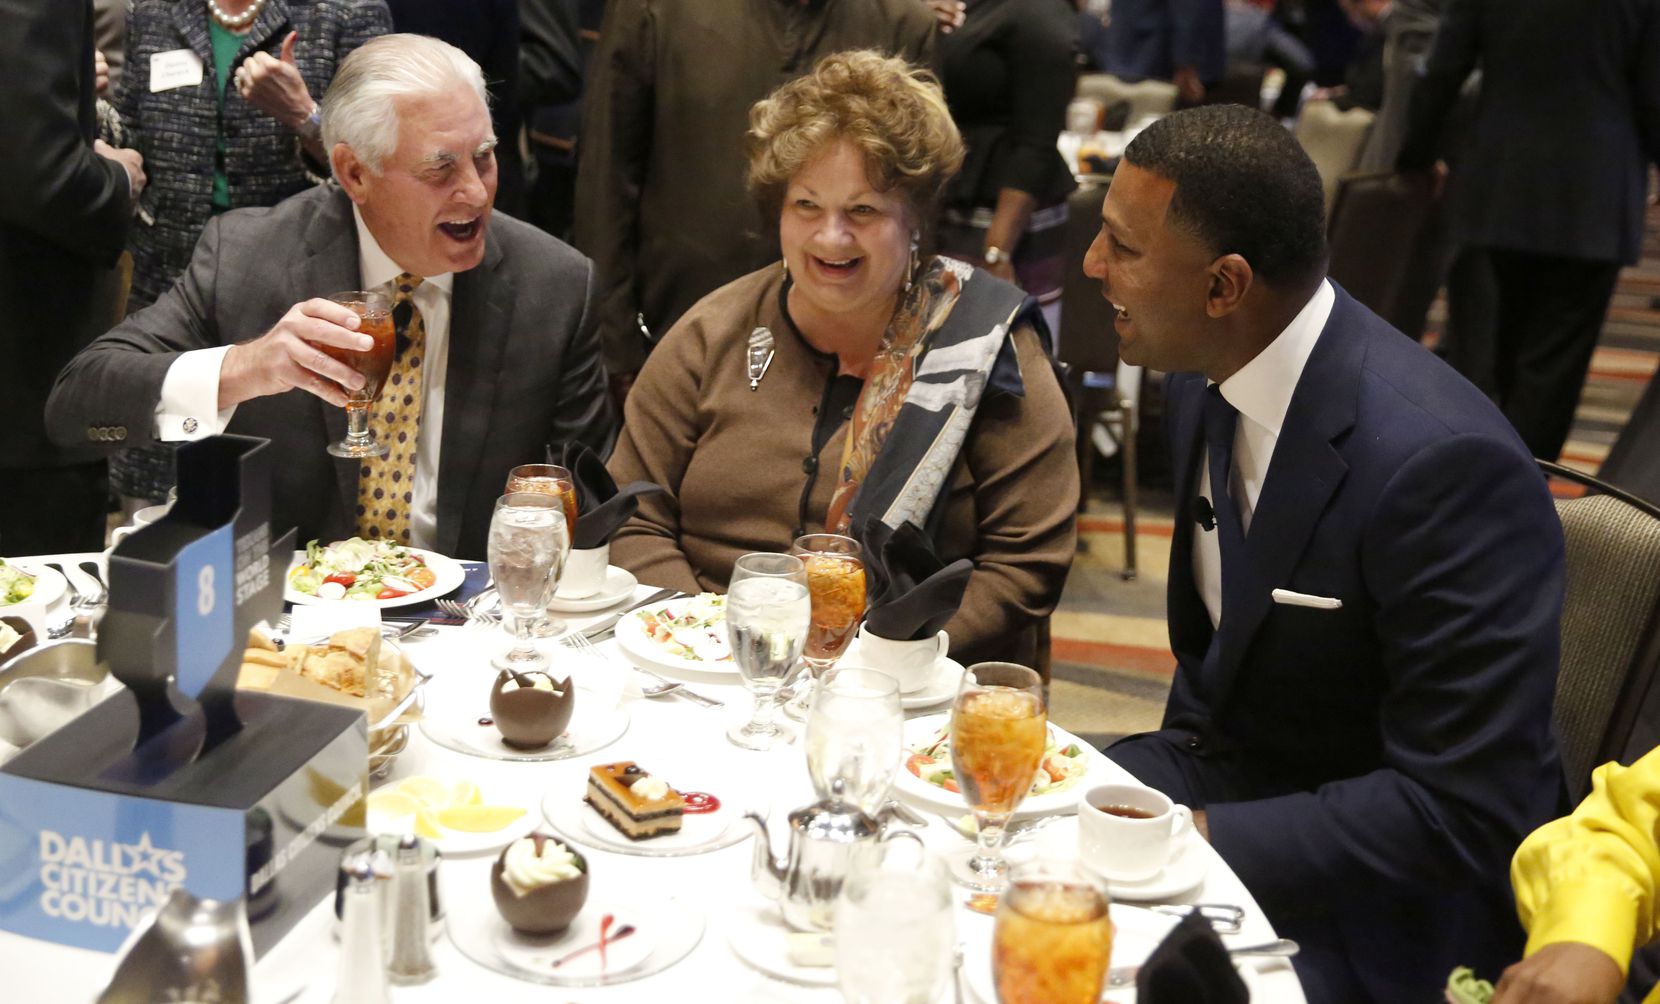 Rex Tillerson (left), former U.S. secretary of state and former chairman and CEO of Exxon Mobil, laughed with his wife, Renda St. Claire, and Fred Perpall before the Dallas Citizens Council meeting at the Hyatt Regency Hotel in December 2018.